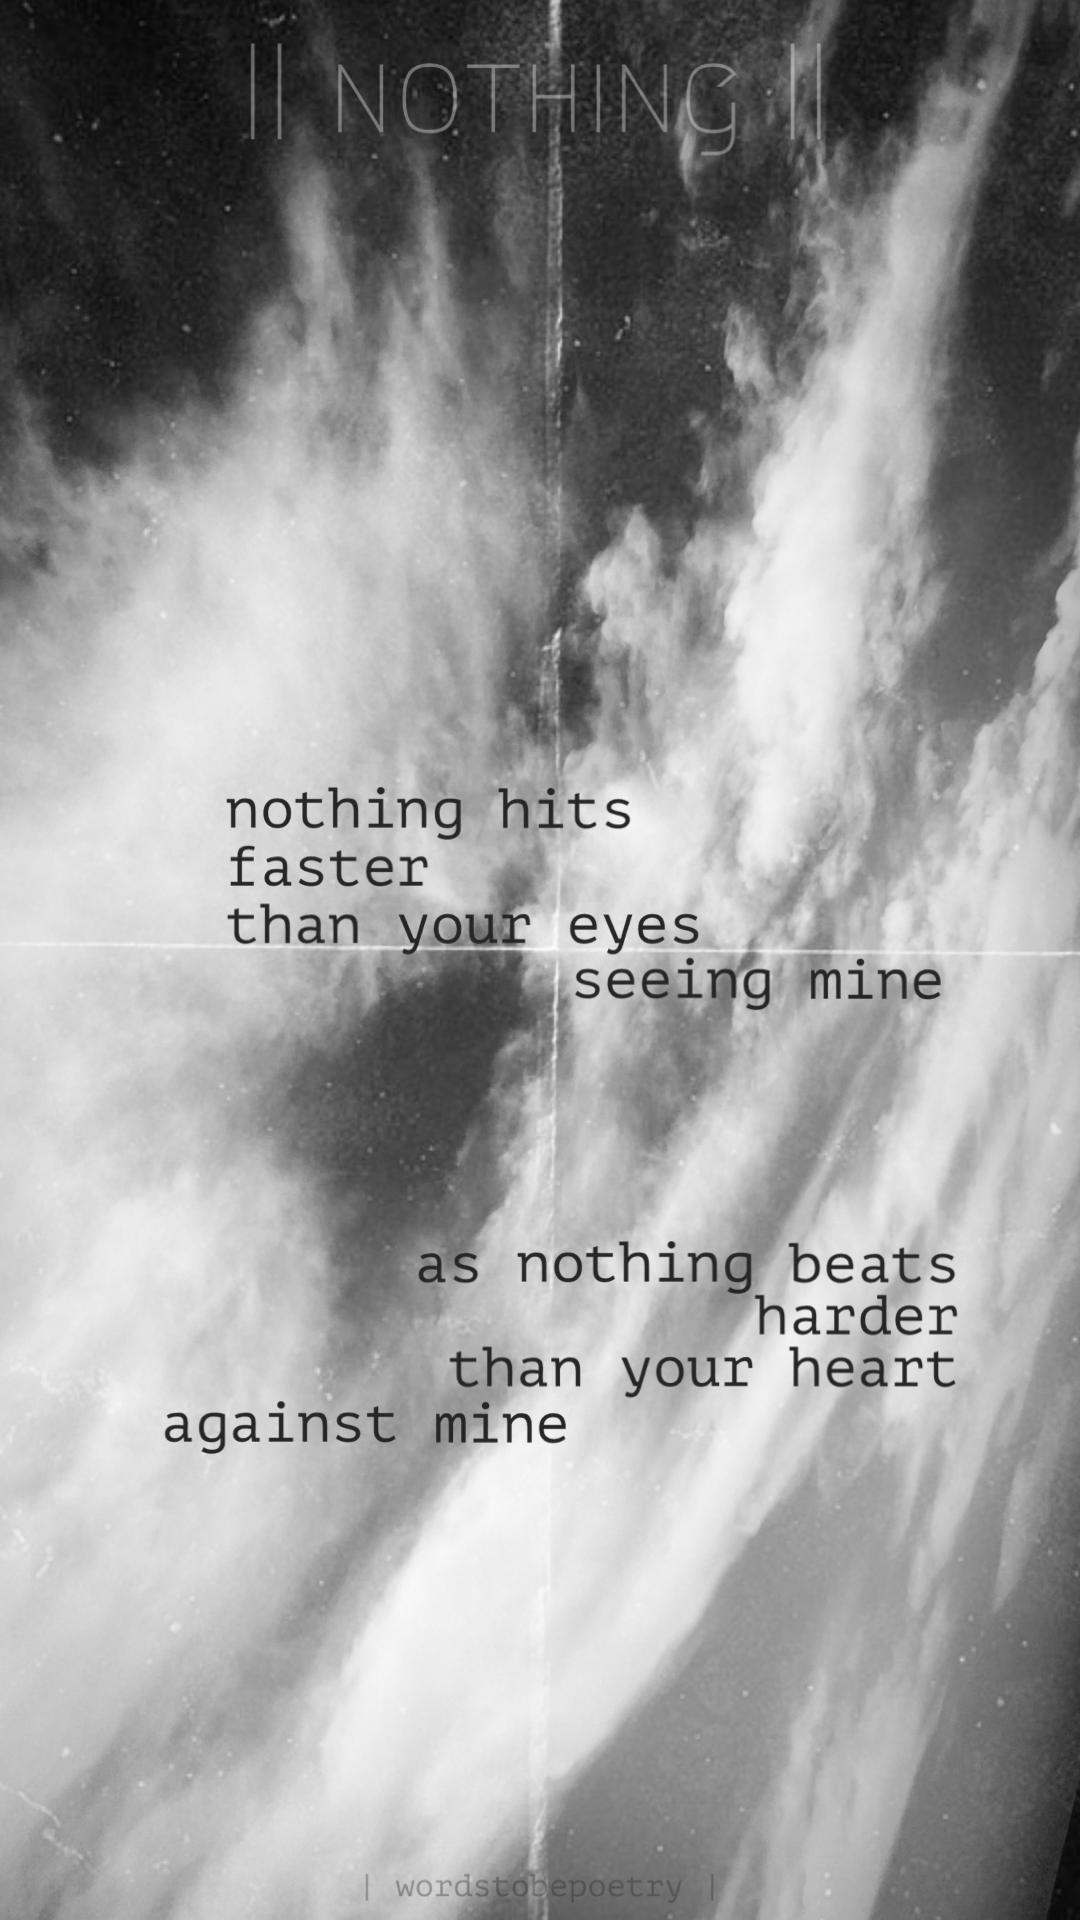  || nothing || </p>
<p>nothing hits faster<br />
than you eyes<br />
seeing mine</p>
<p>as nothing beats harder<br />
than you heart<br />
against mine